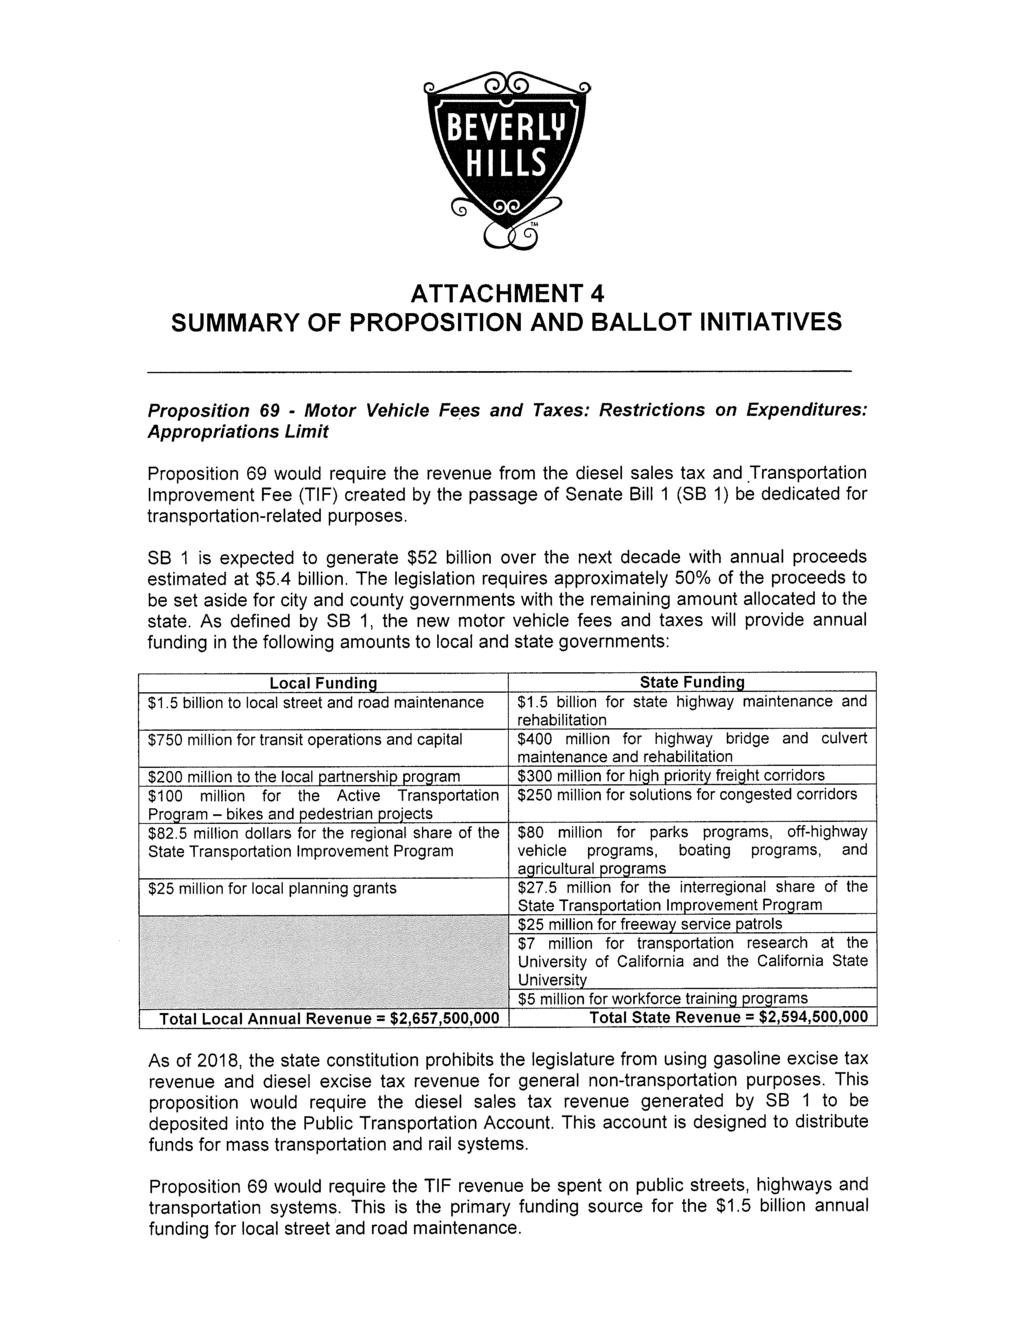 ) ATTACHMENT 4 SUMMARY OF PROPOSITION AND BALLOT INITIATIVES Proposition 69 - Motor Vehicle Fees and Taxes: Restrictions on Expenditures: Appropriations Limit Proposition 69 would requite the revenue